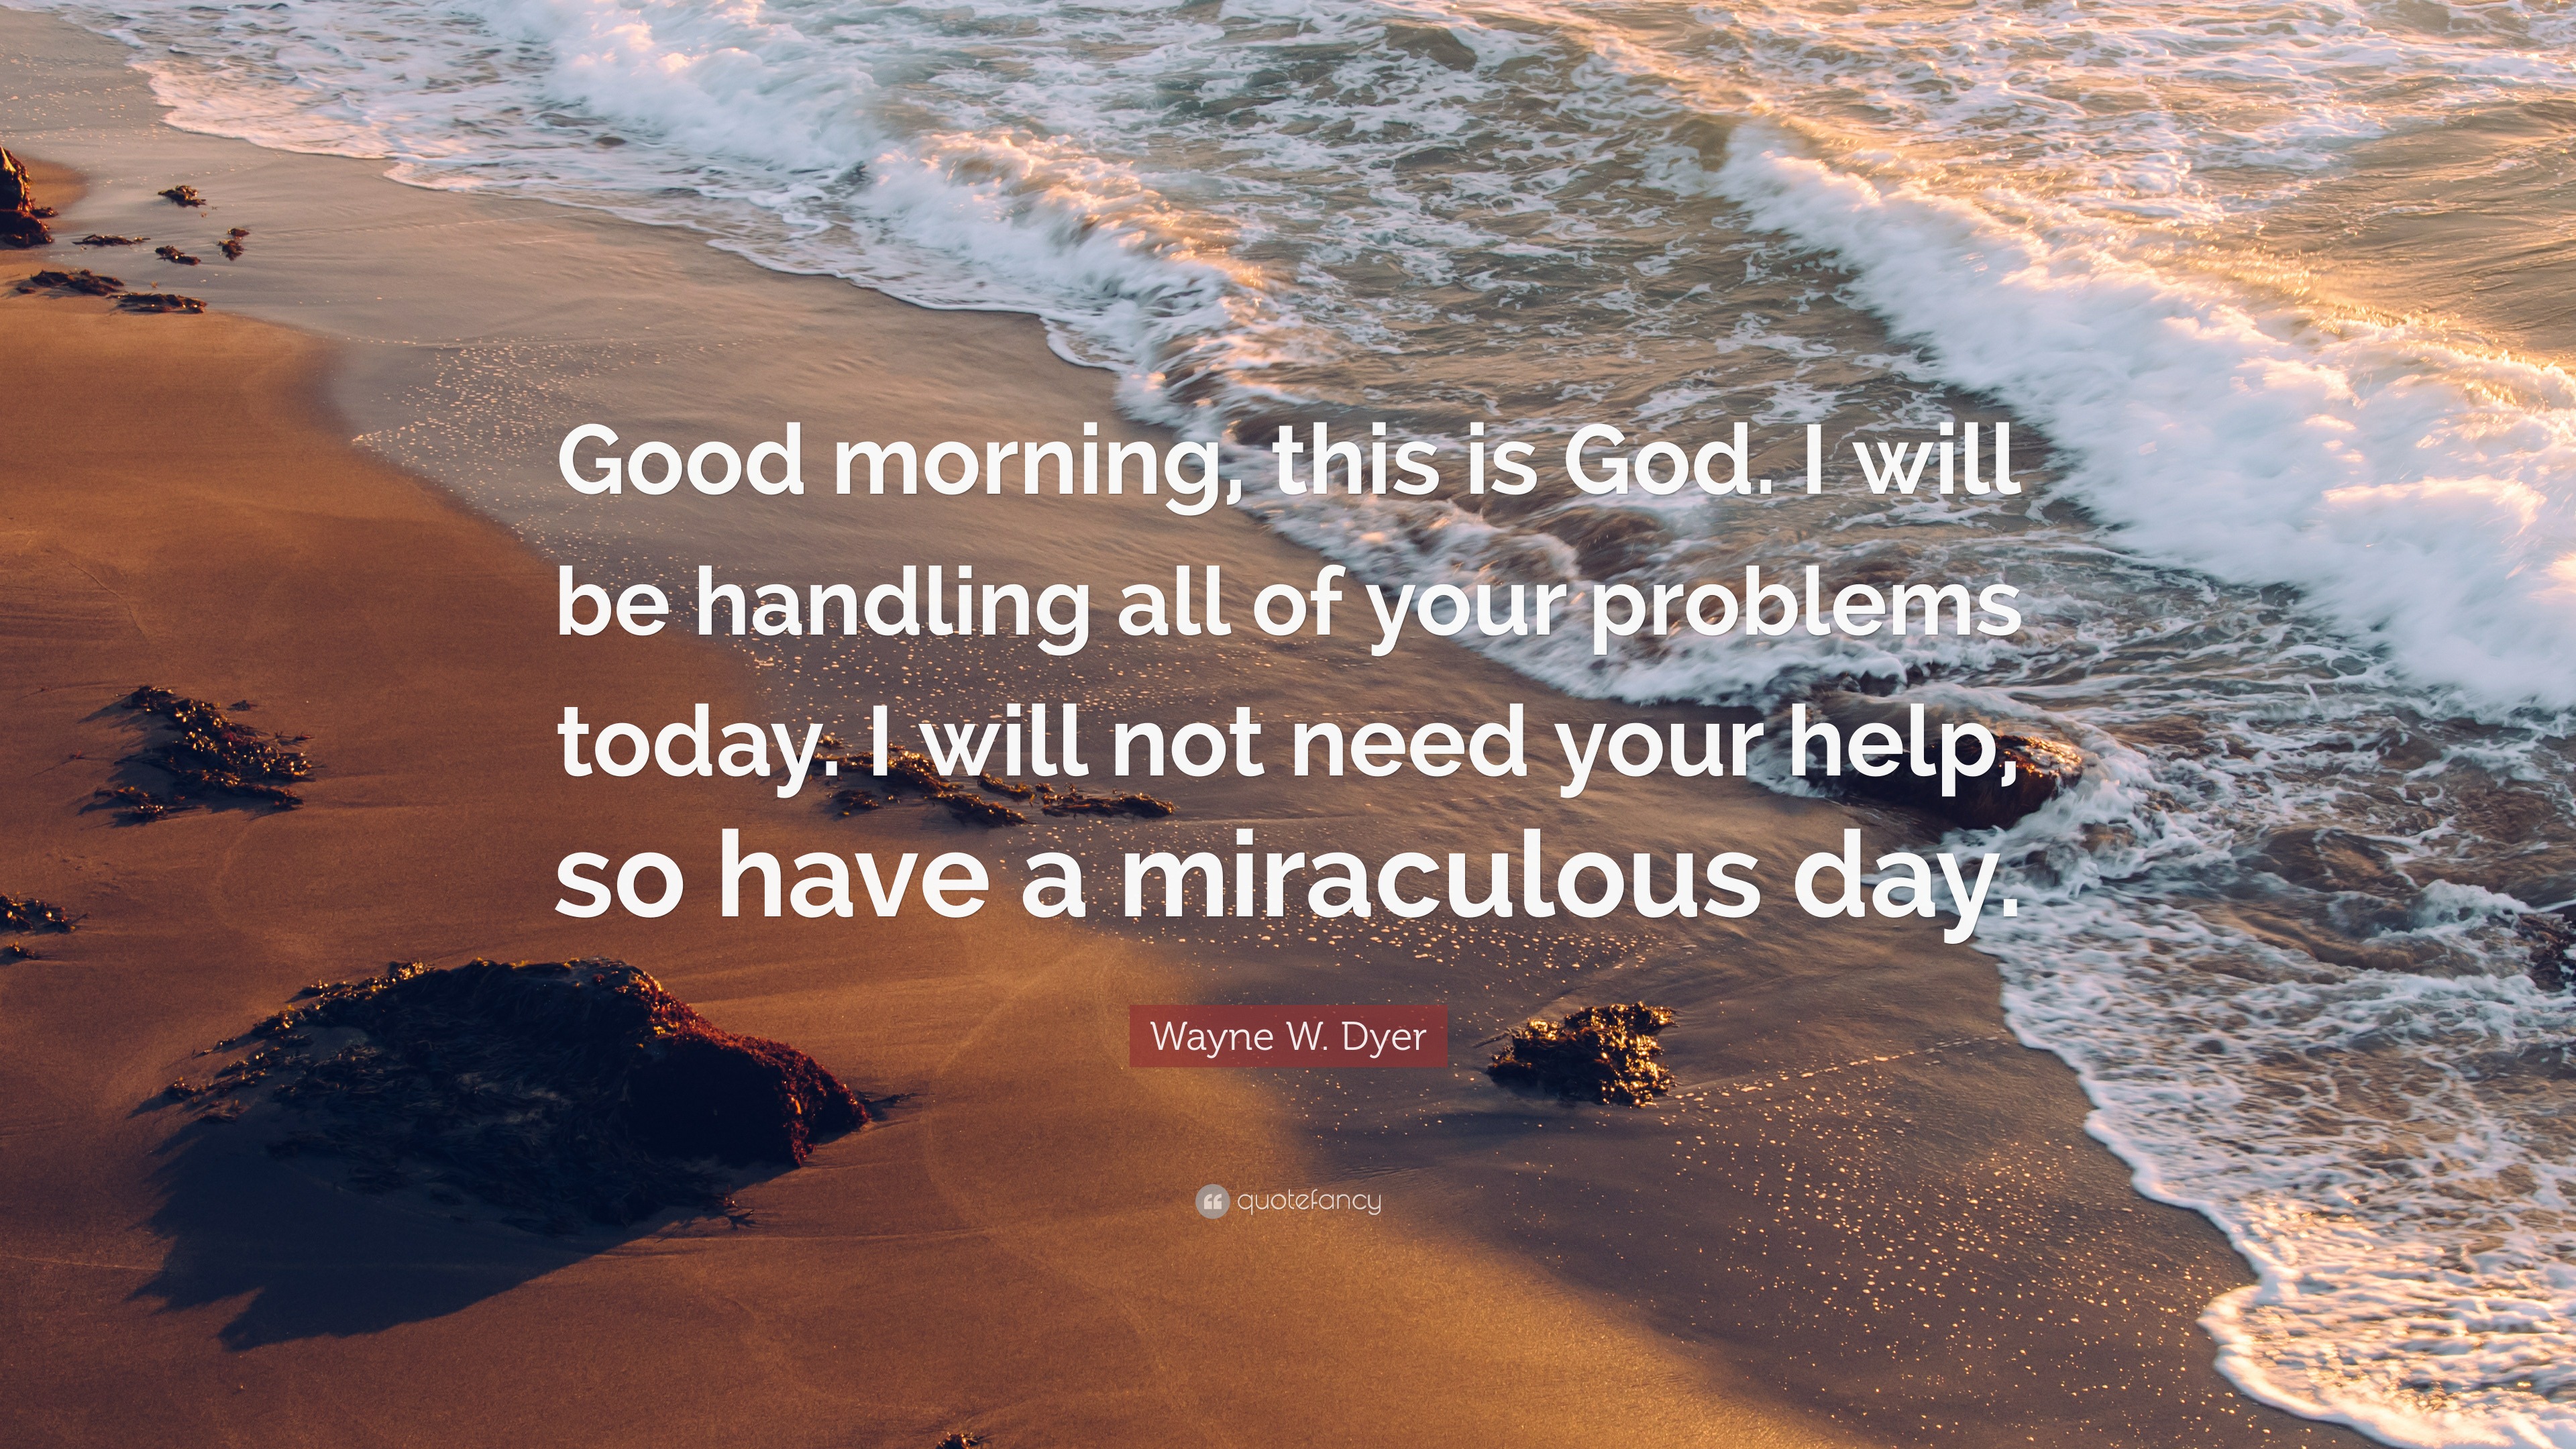 Wayne W Dyer Quote Good Morning This Is God I Will Be Handling All Of Your Problems Today I Will Not Need Your Help So Have A Miraculou